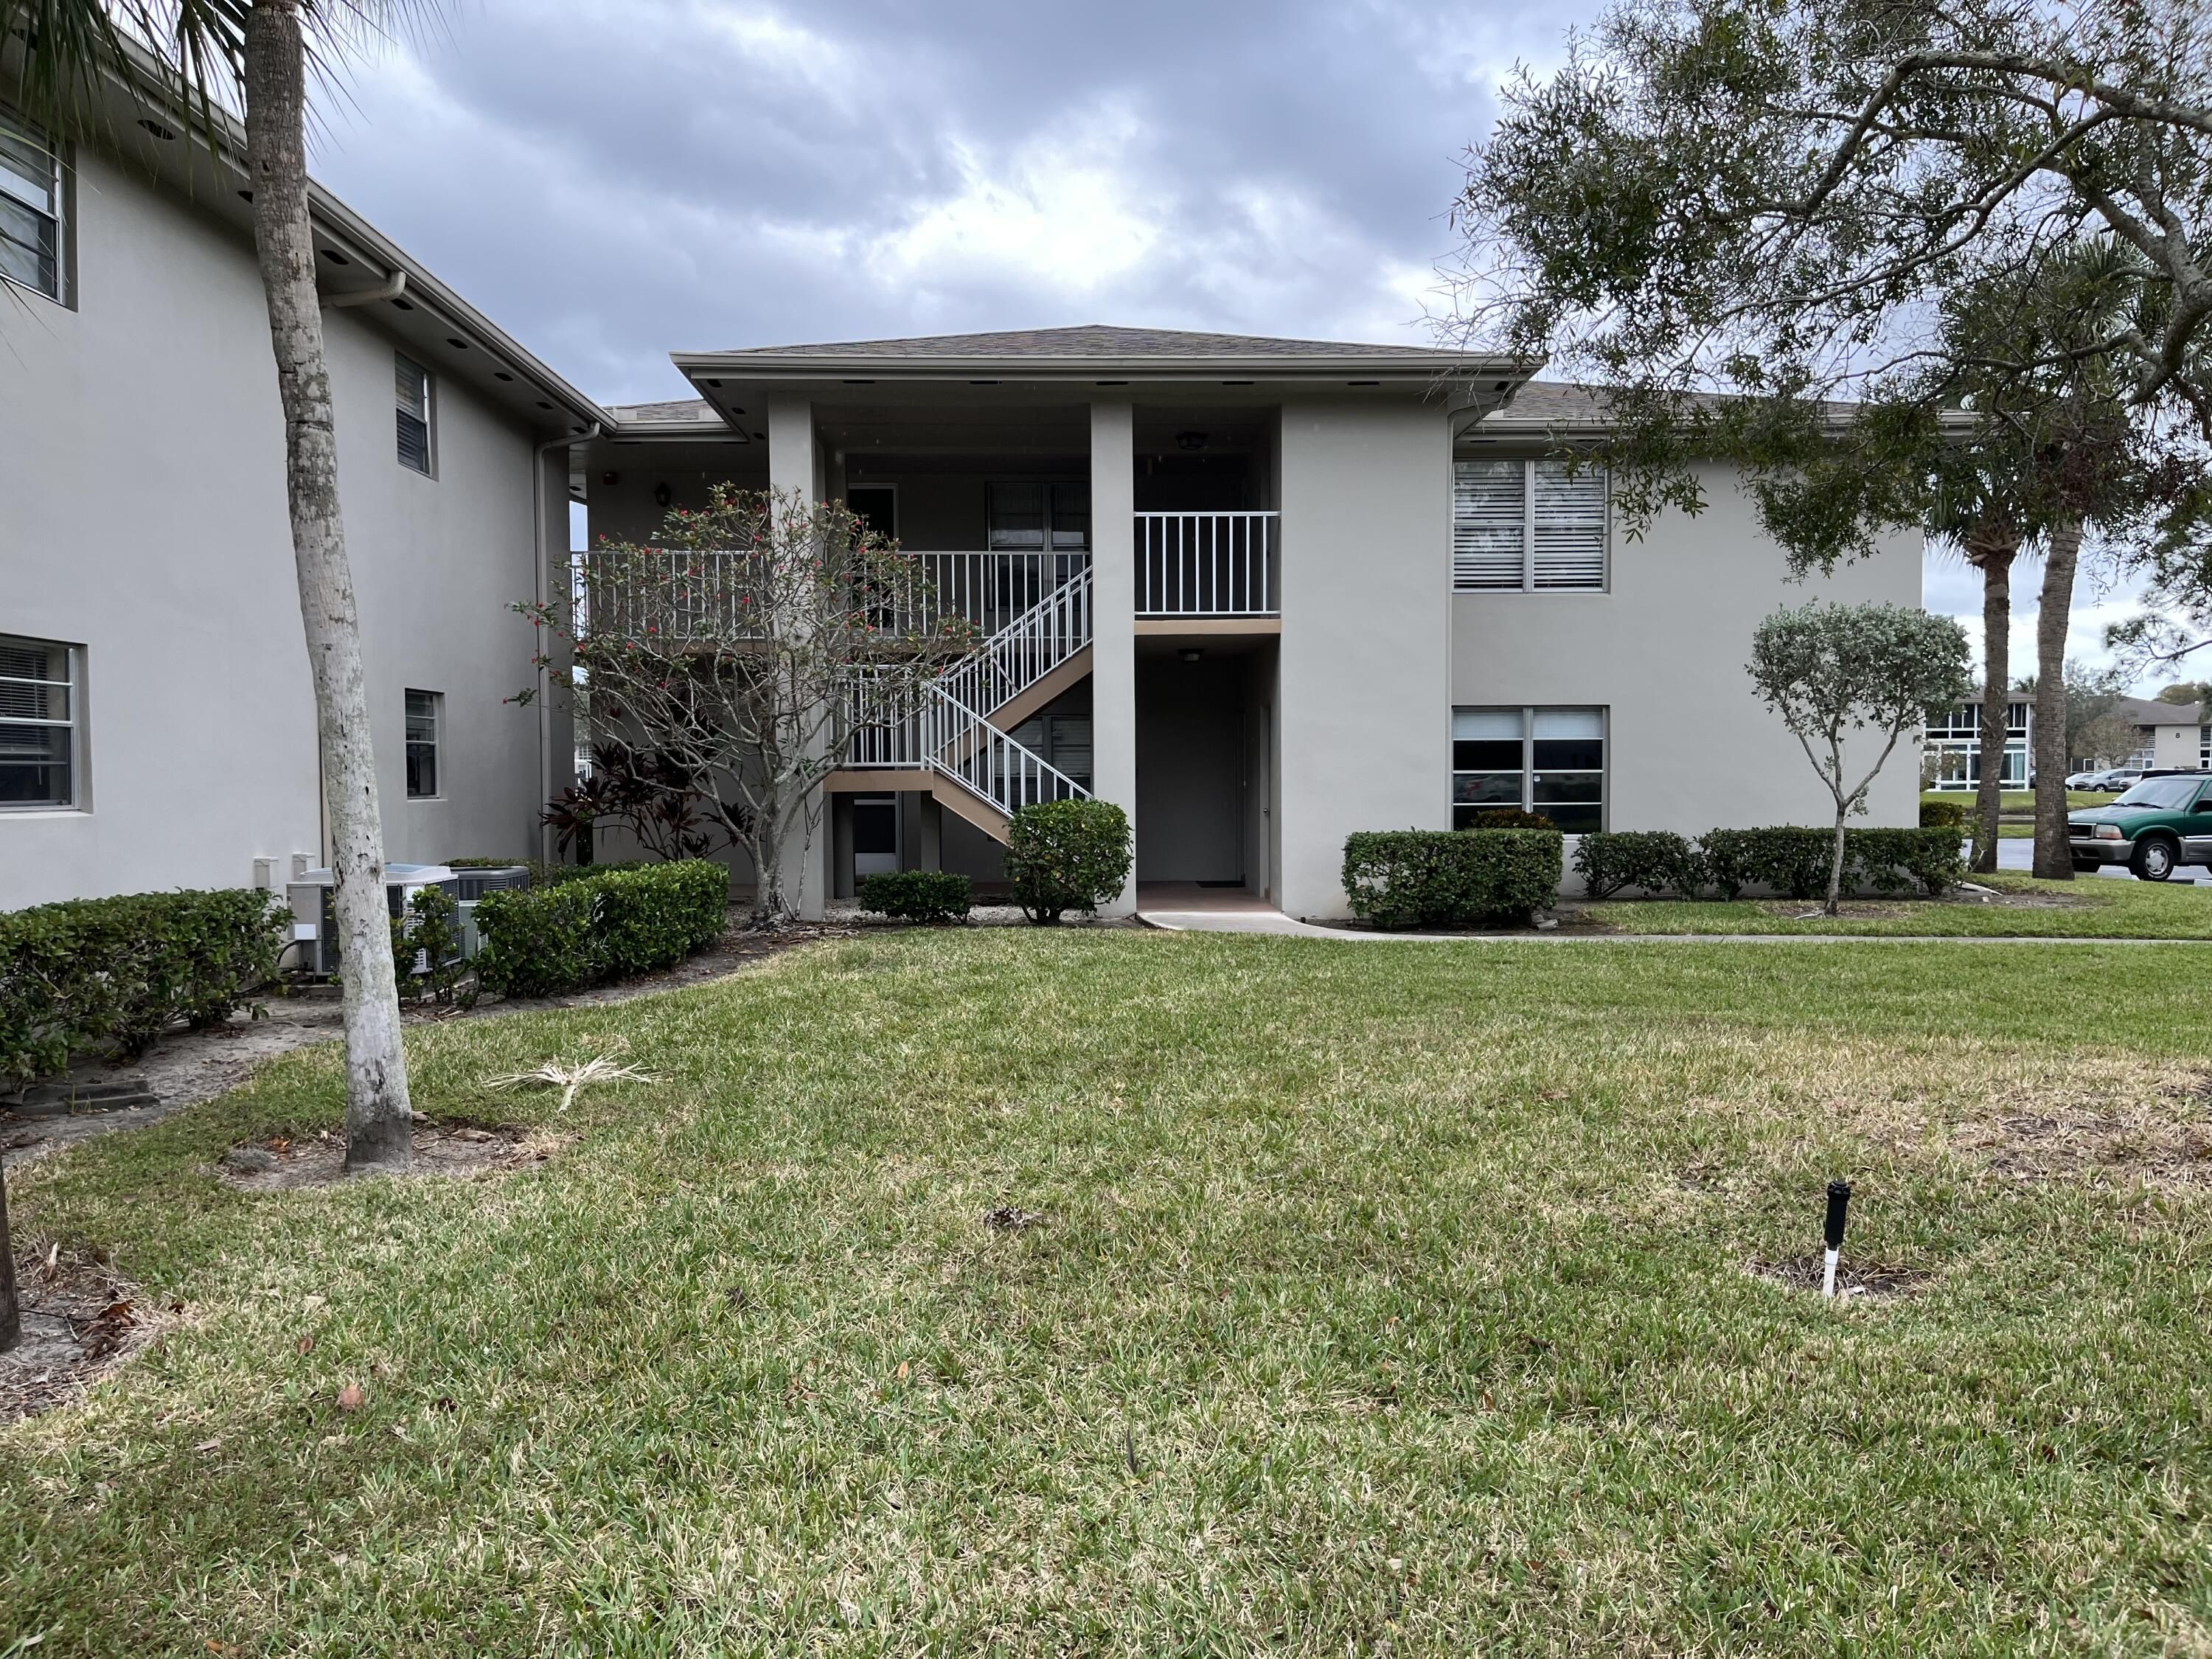 image of property at 3 Vista St. Lucie Trl Trail 101